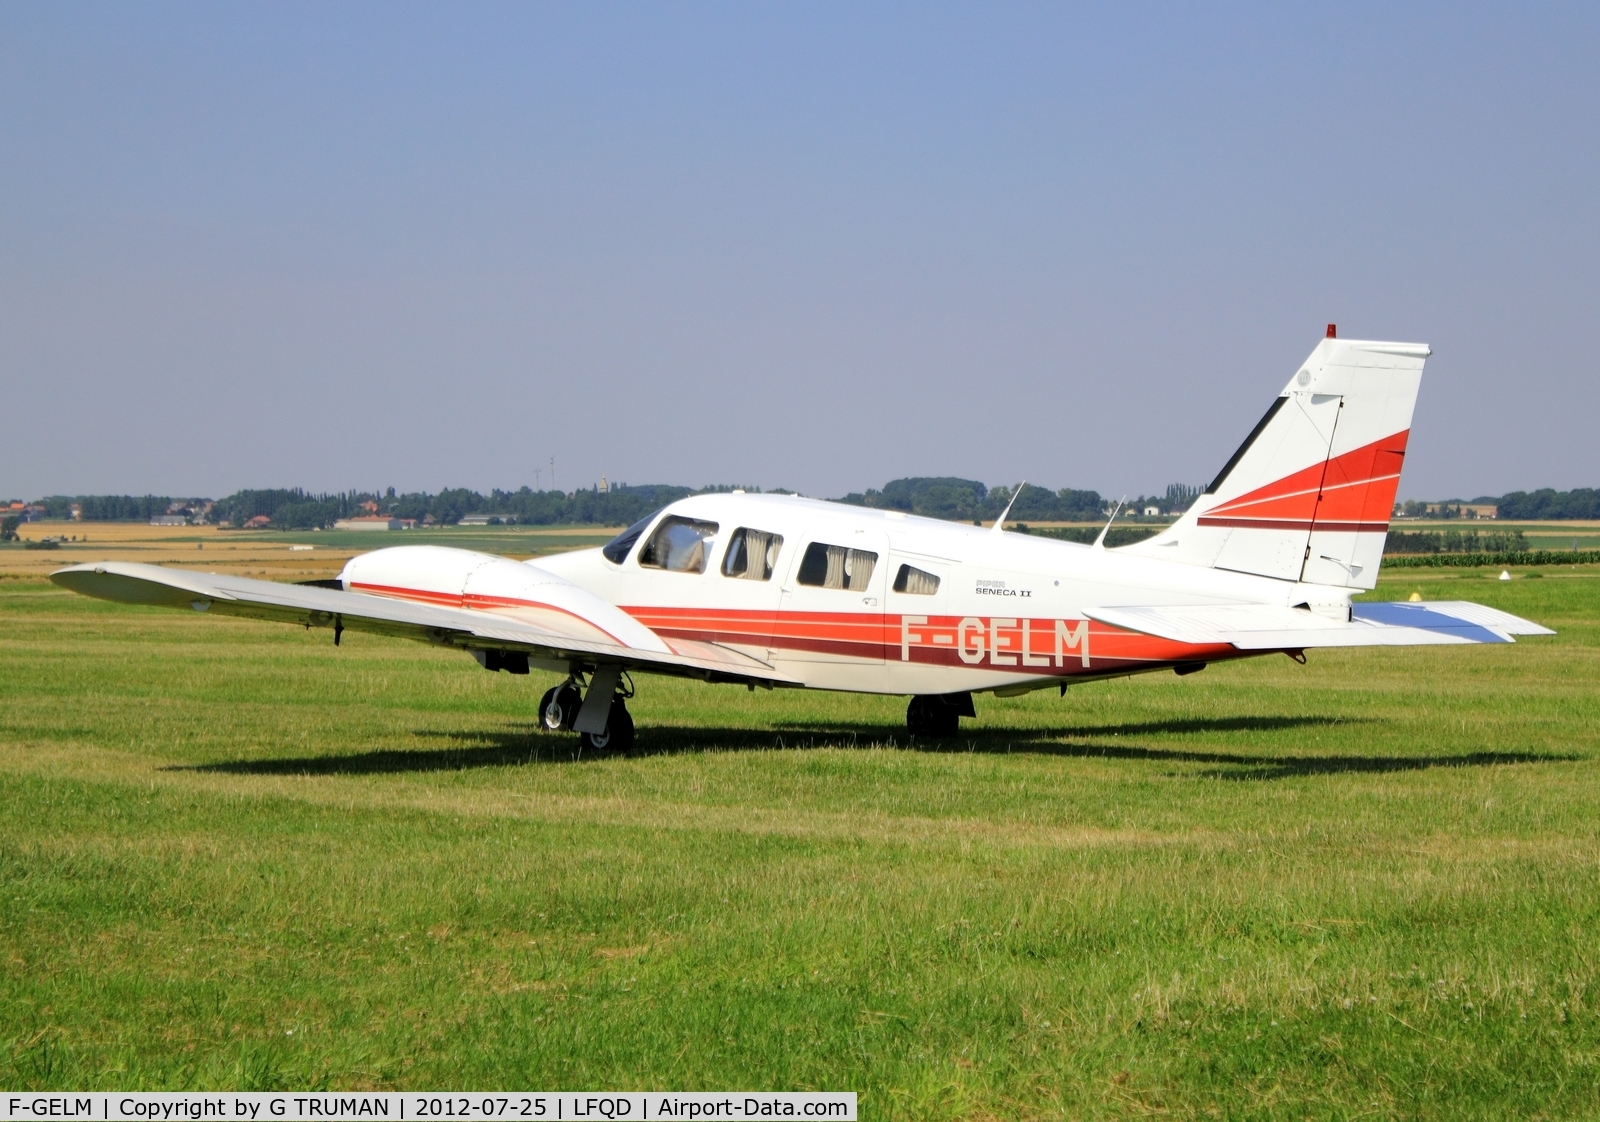 F-GELM, Piper PA-34-200T C/N 34-7870040, Visiting Arras in the baking sunshine